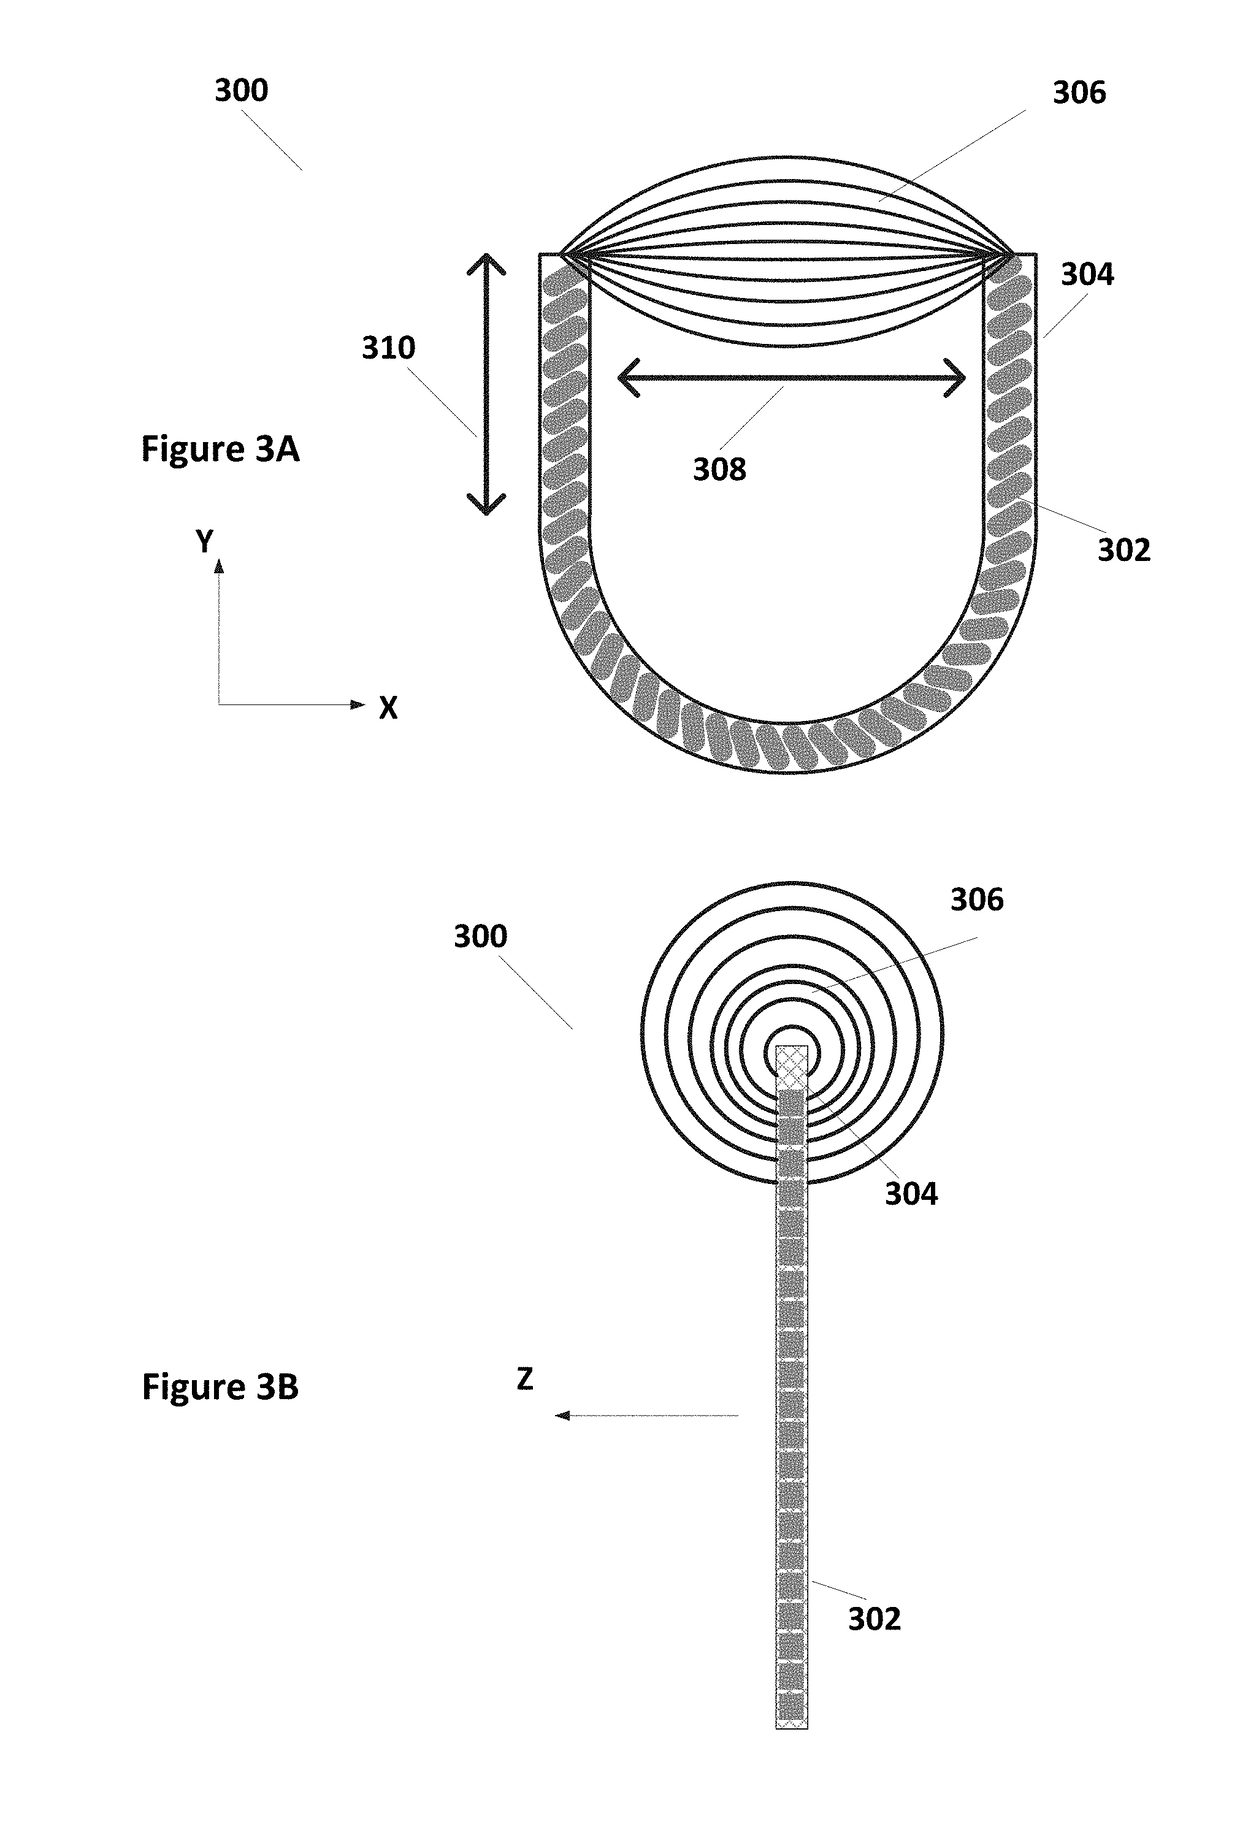 Directed magnetic field coil design